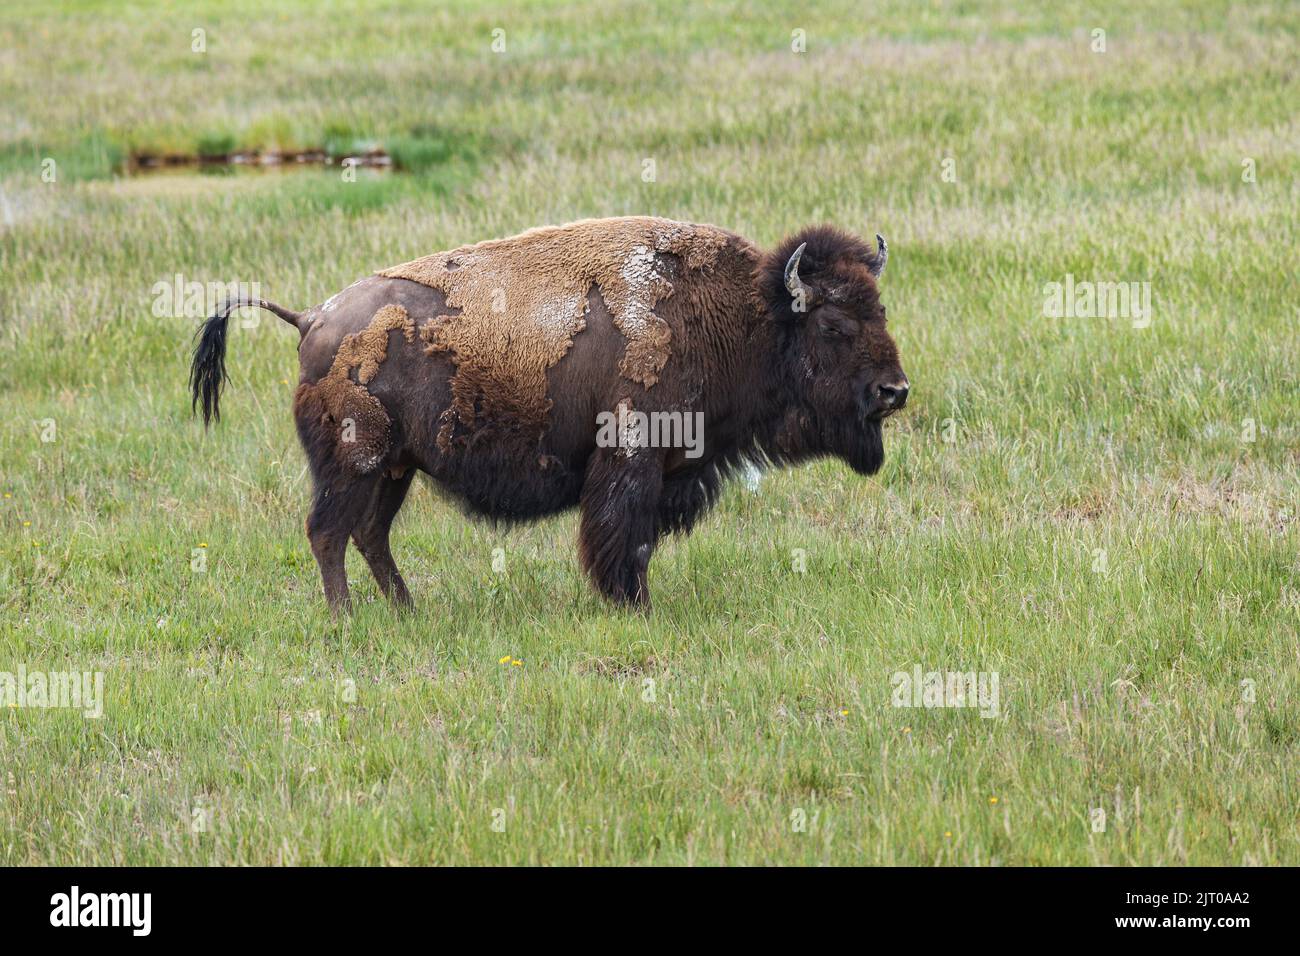 American bison shedding it's winter coat at Yellowstone National Park, Wyoming, USA Stock Photo